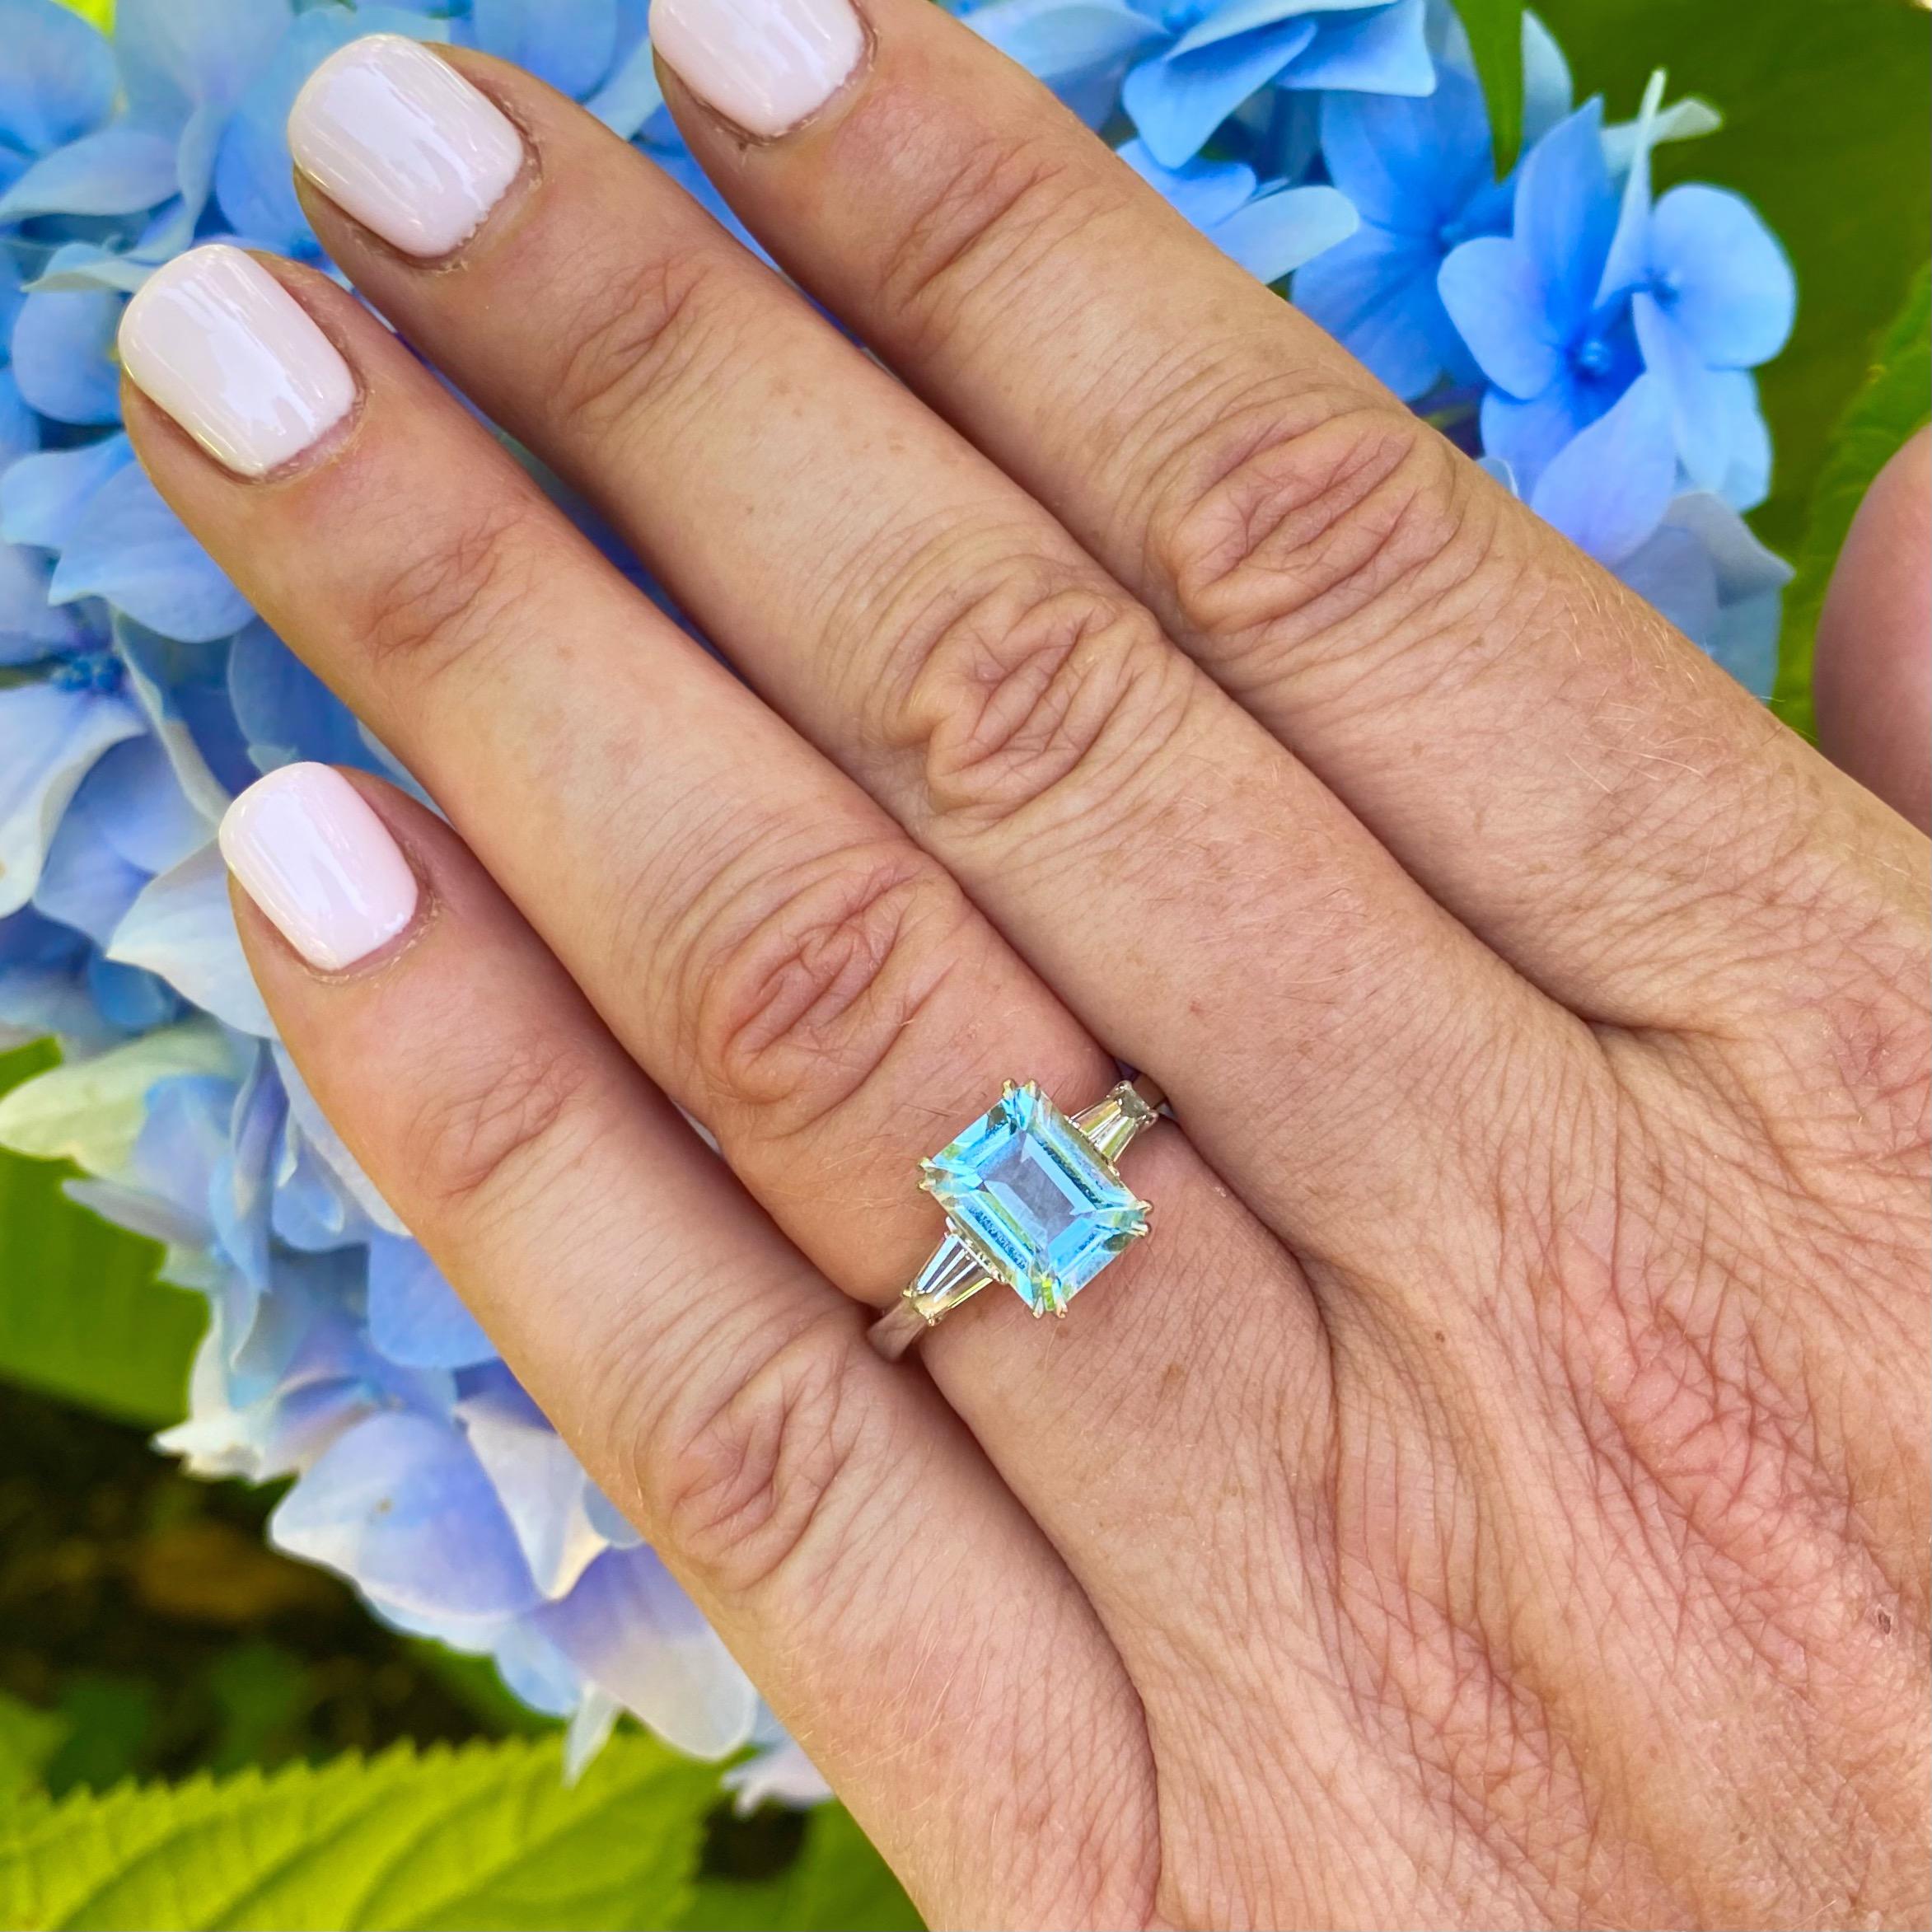 A truly gorgeous and timeless piece of jewelry. This 18 karat white gold piece features an fabulous 3.00 carat aquamarine with beautiful light return and a lovely soft blue color. The rectangular cut aqua is flanked by a perfectly matched pair of